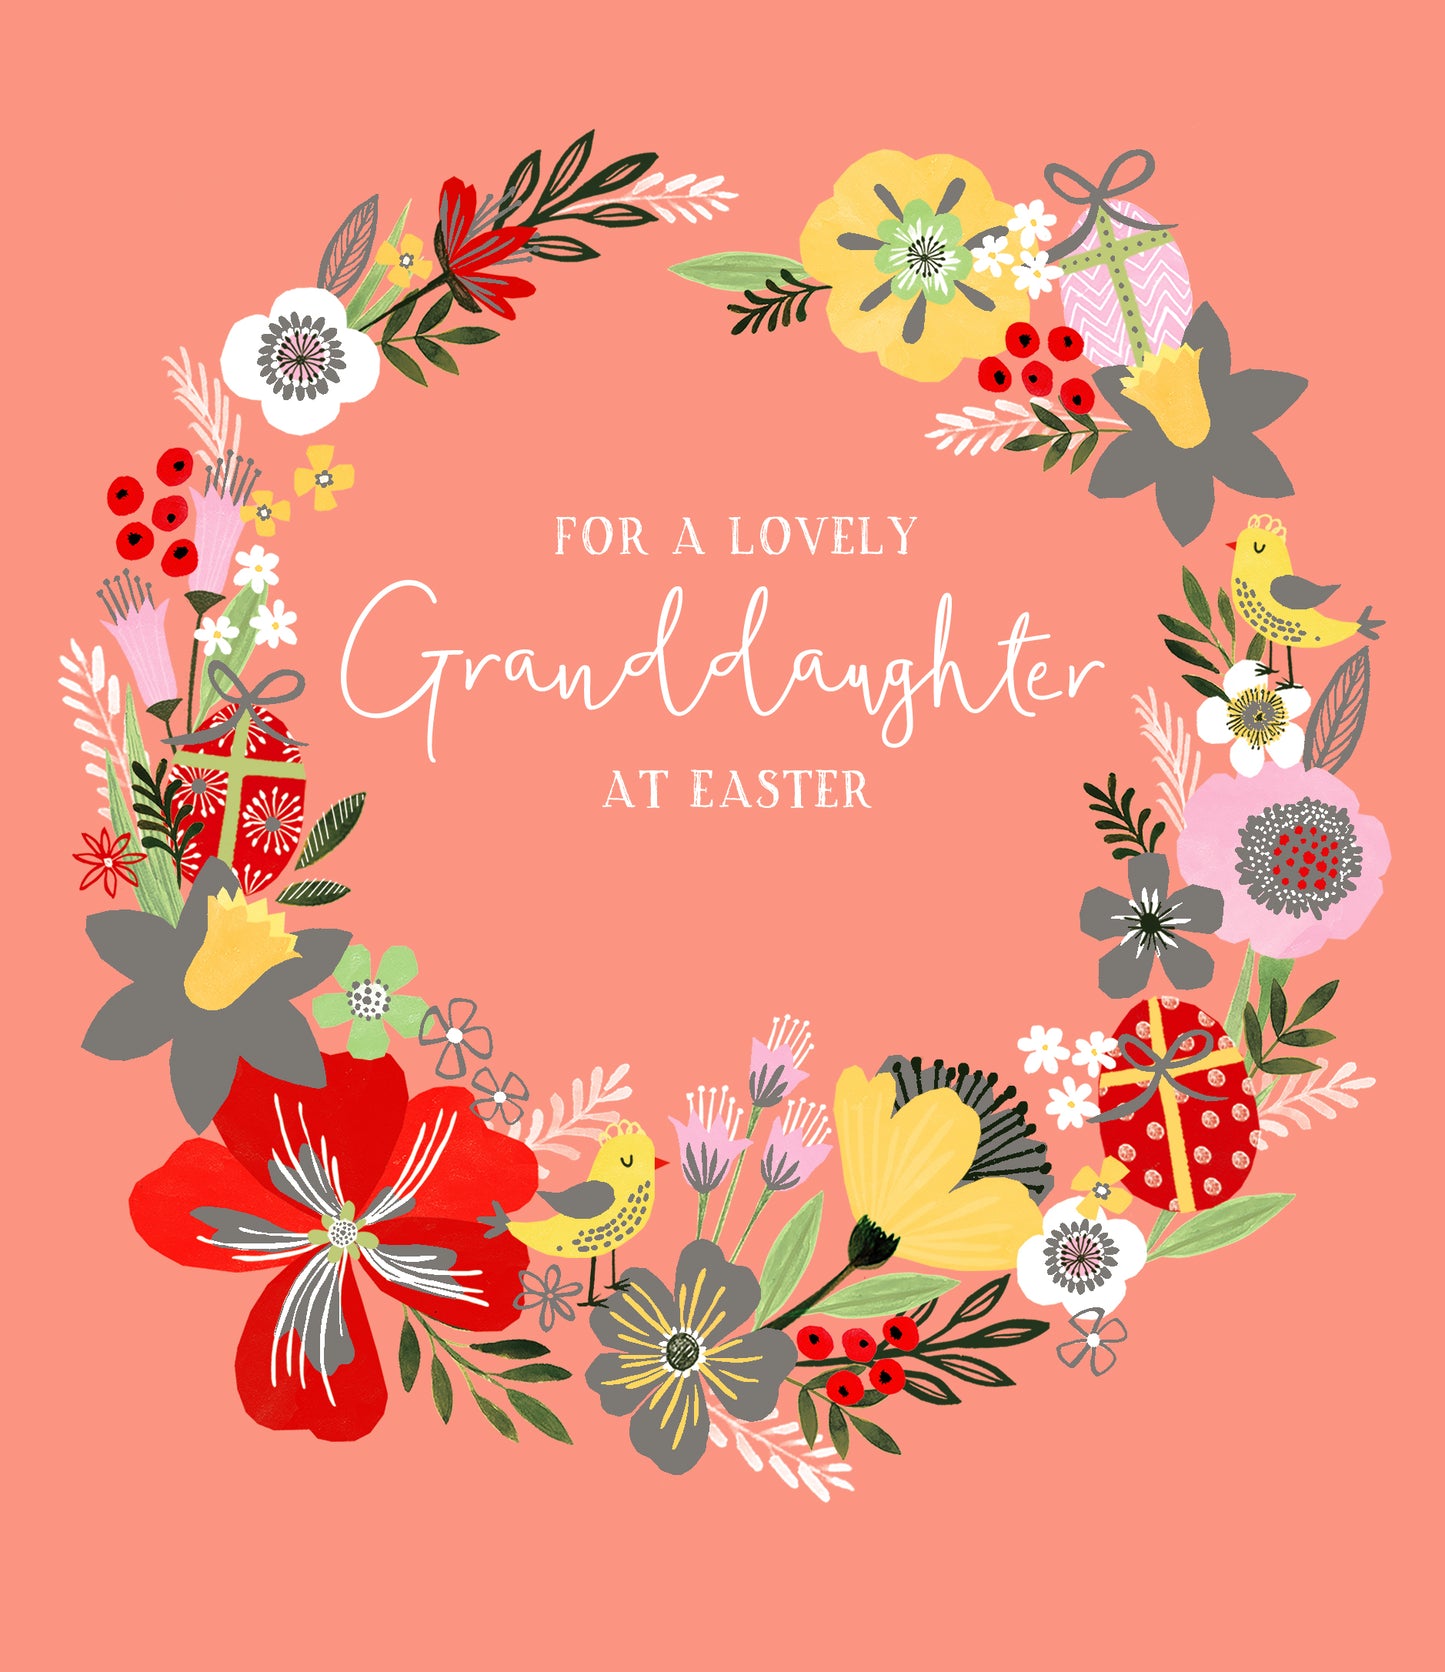 A Lovely Granddaughter At Happy Easter Greeting Card